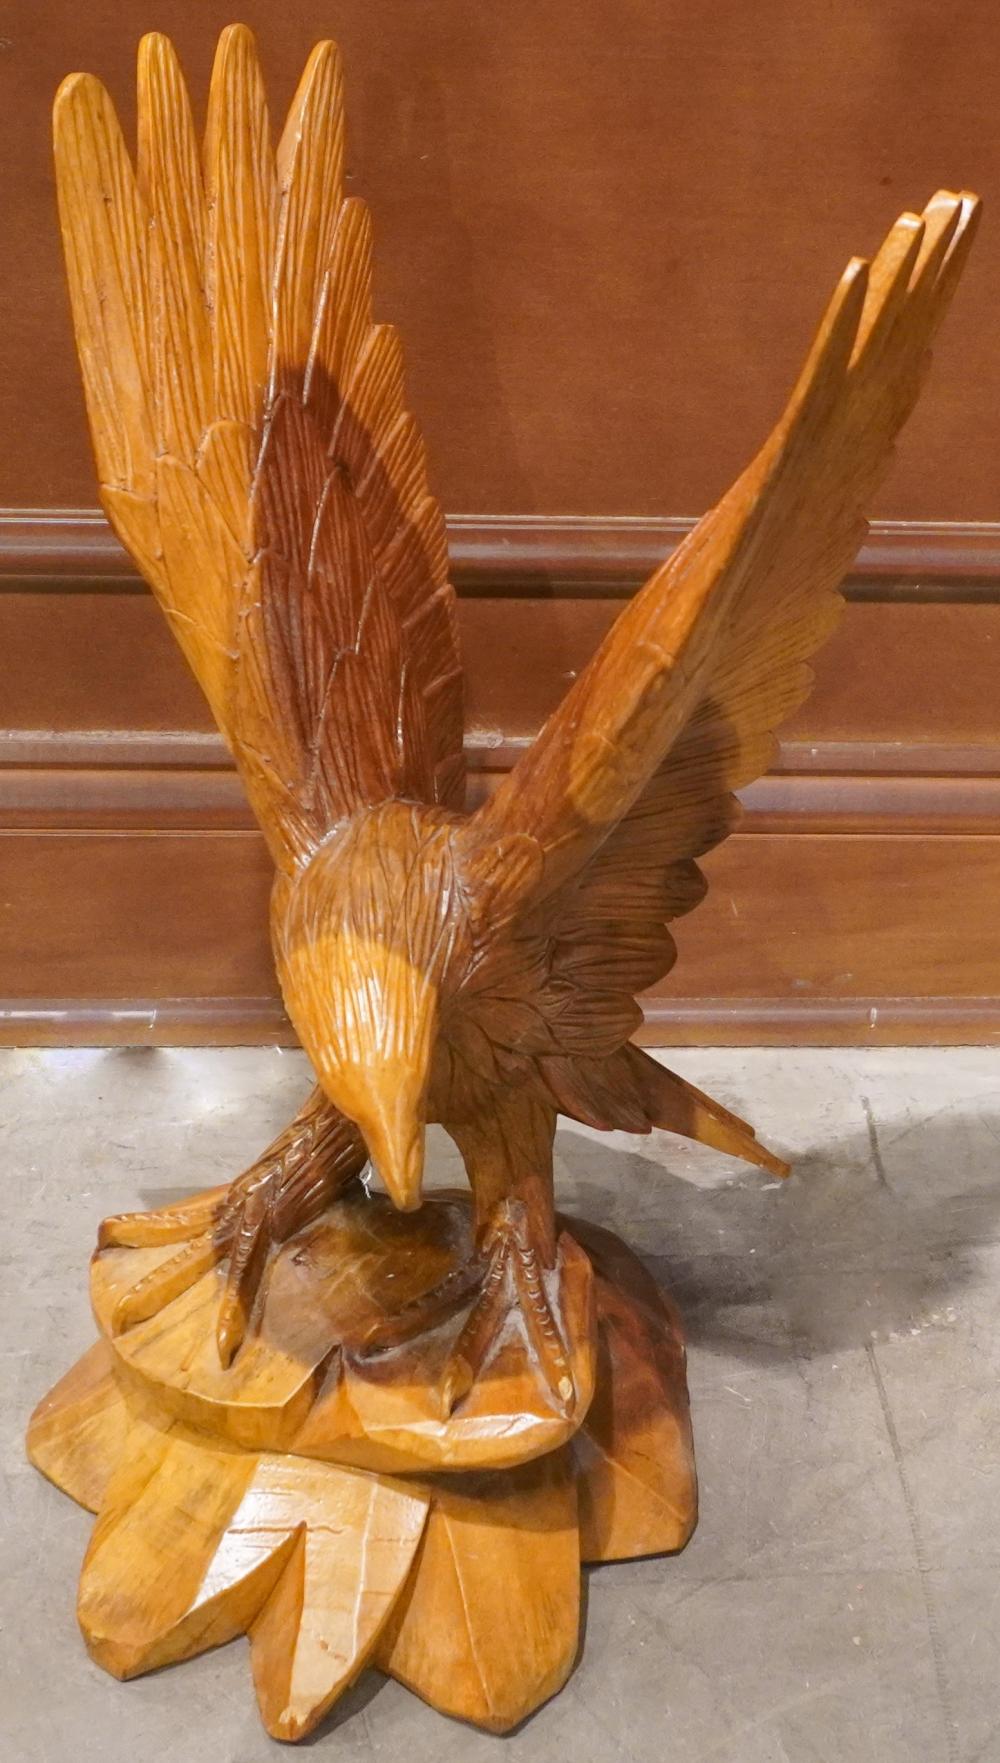 CARVED WOOD FIGURE OF AN EAGLE, H: 21